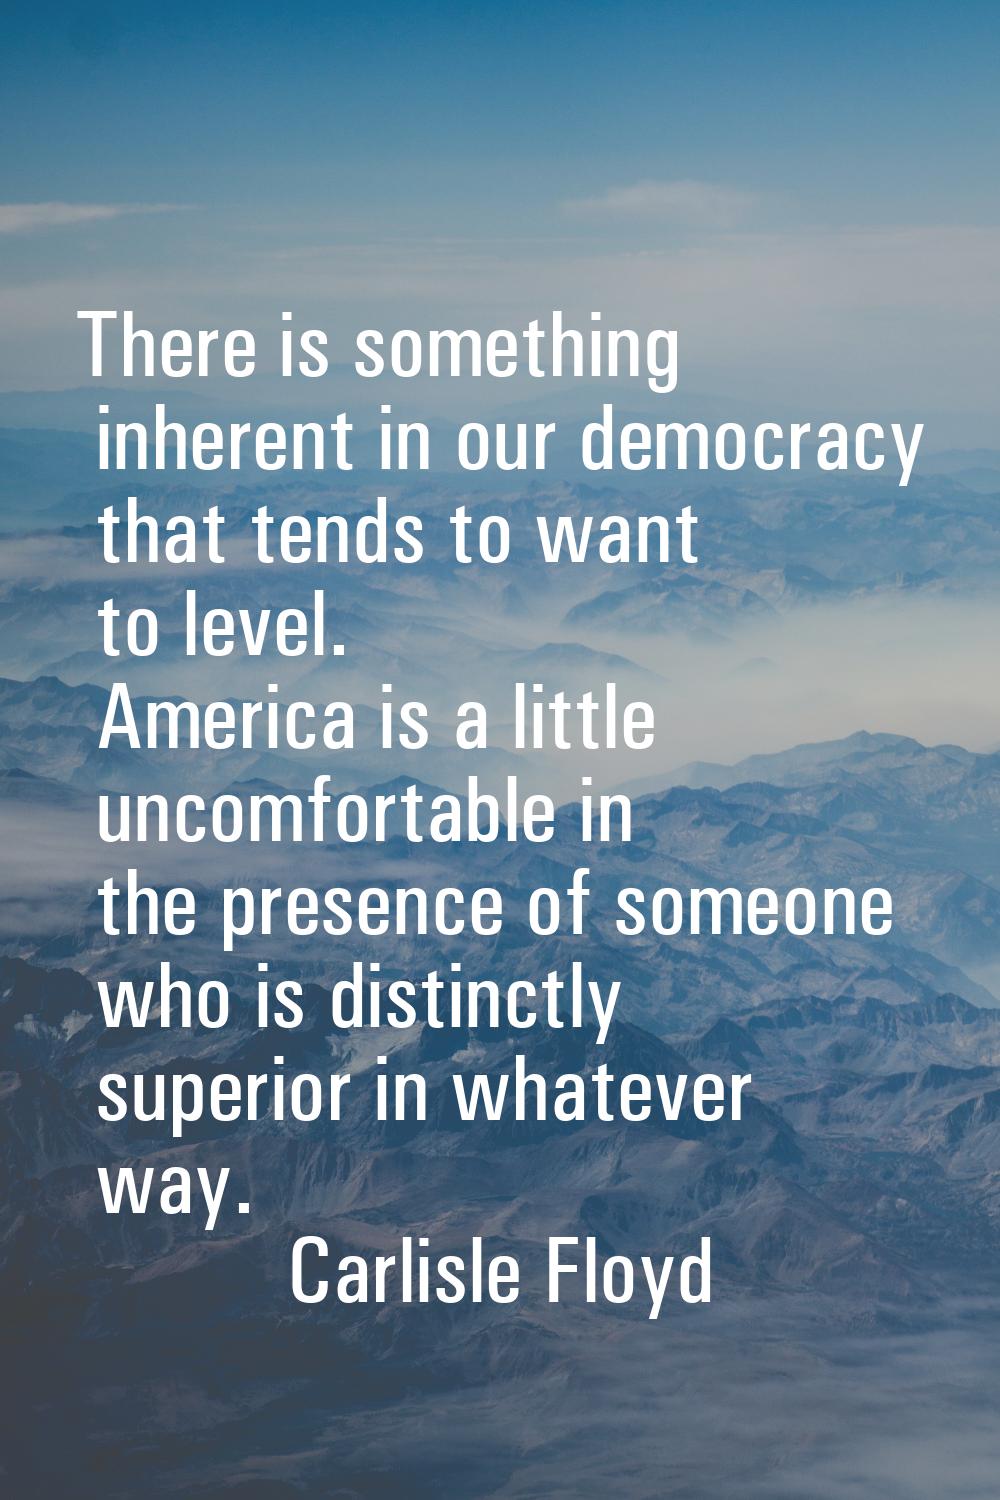 There is something inherent in our democracy that tends to want to level. America is a little uncom